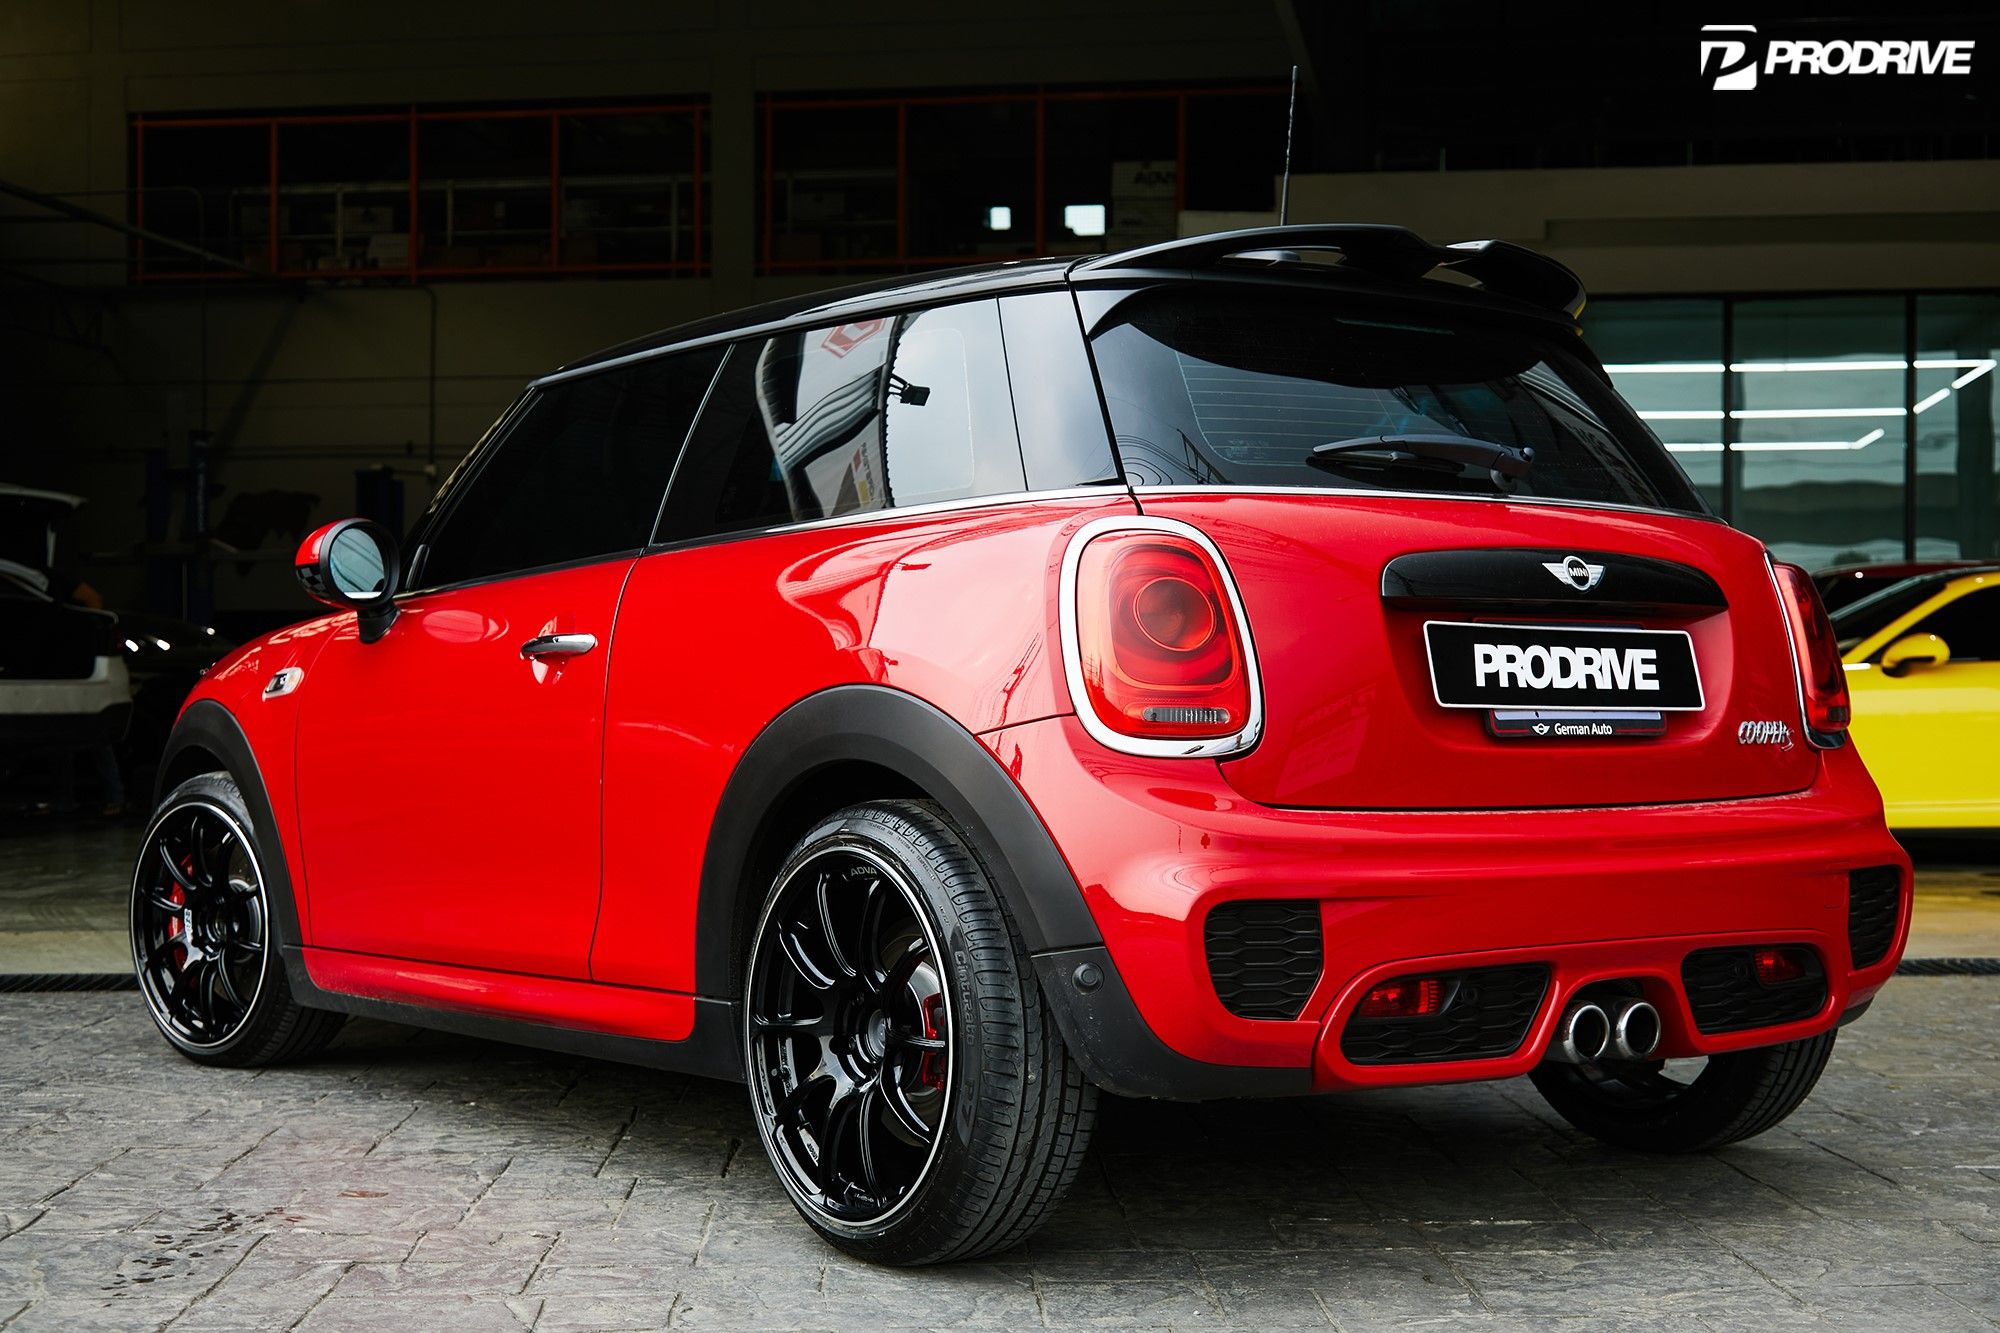 King Of Rims Malaysia Mini Cooper With Original 18 Inch JCW, 46% OFF